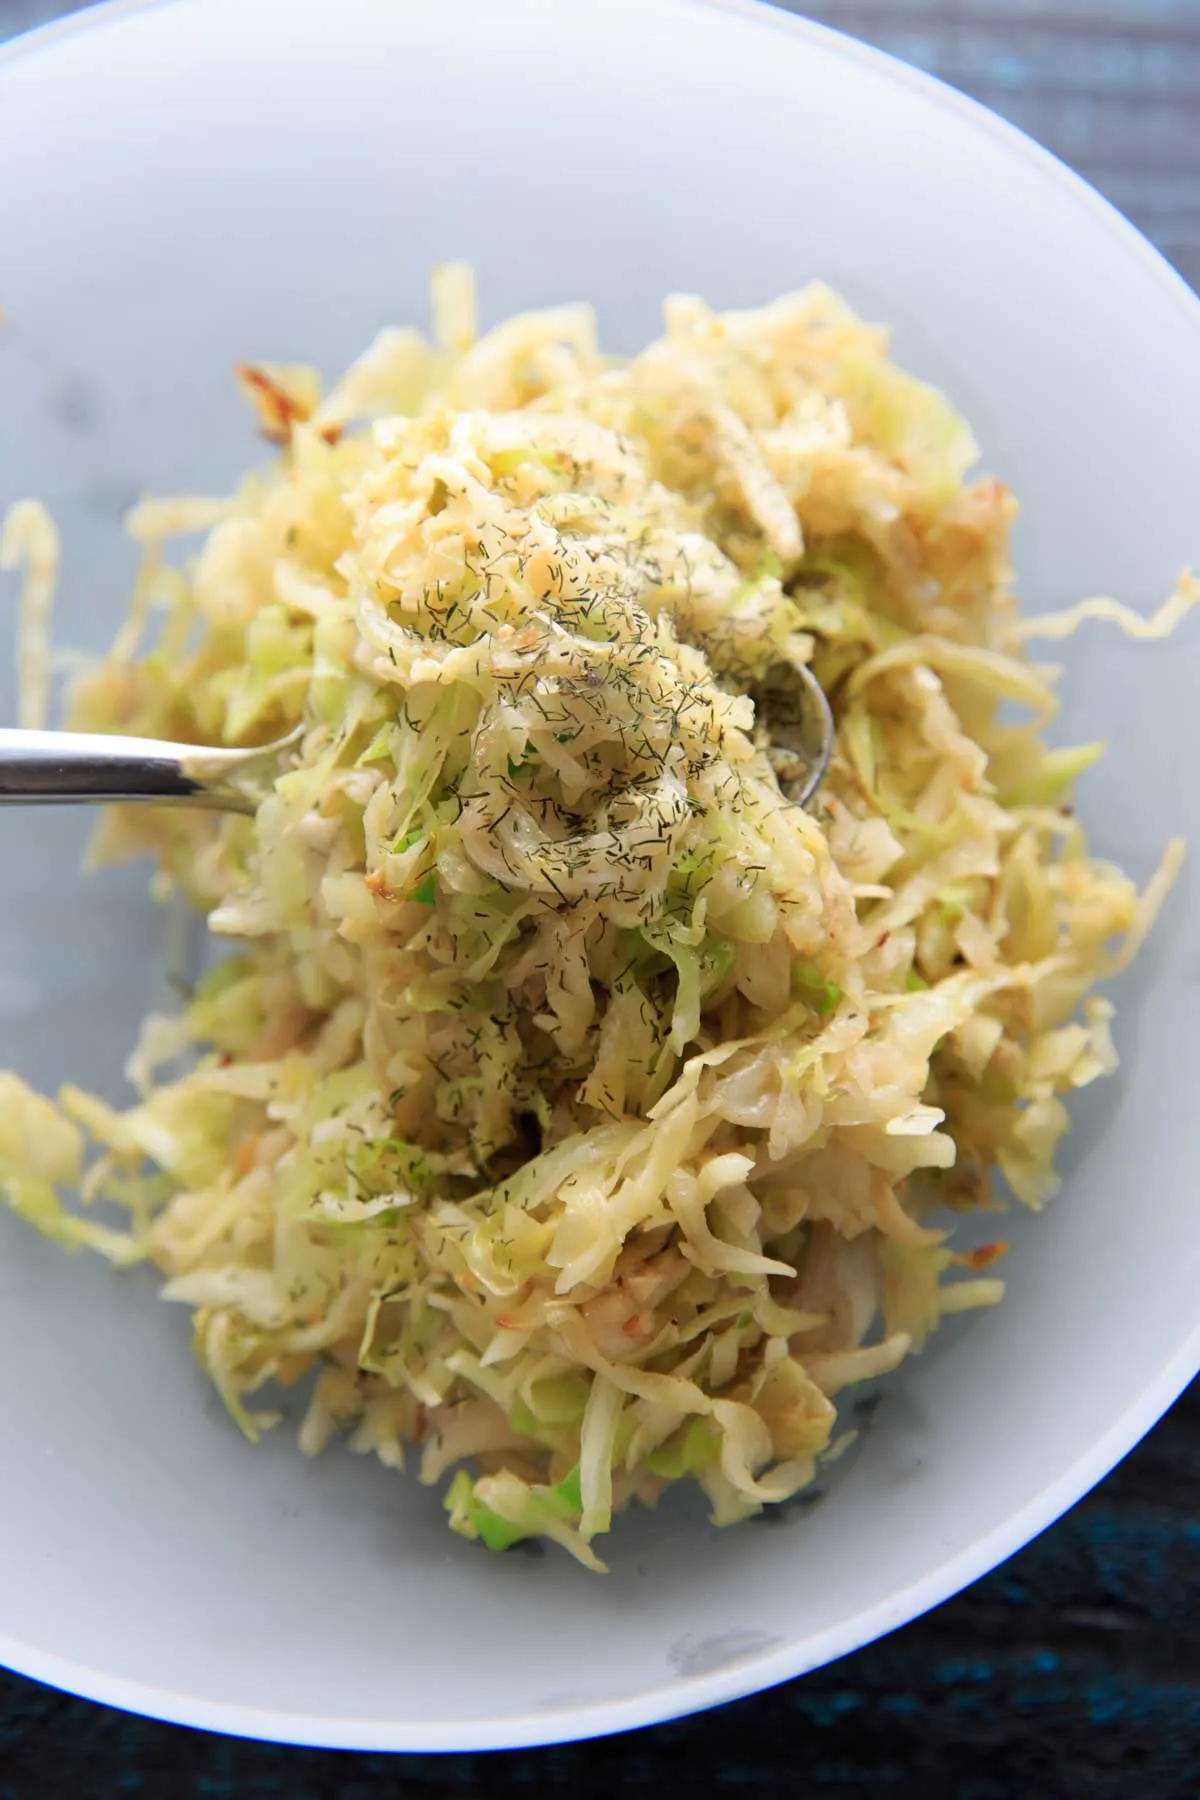 https://www.trialandeater.com/wp-content/uploads/2019/03/Sauteed-Cabbage-Recipe-Trial-and-Eater-5.jpg.webp